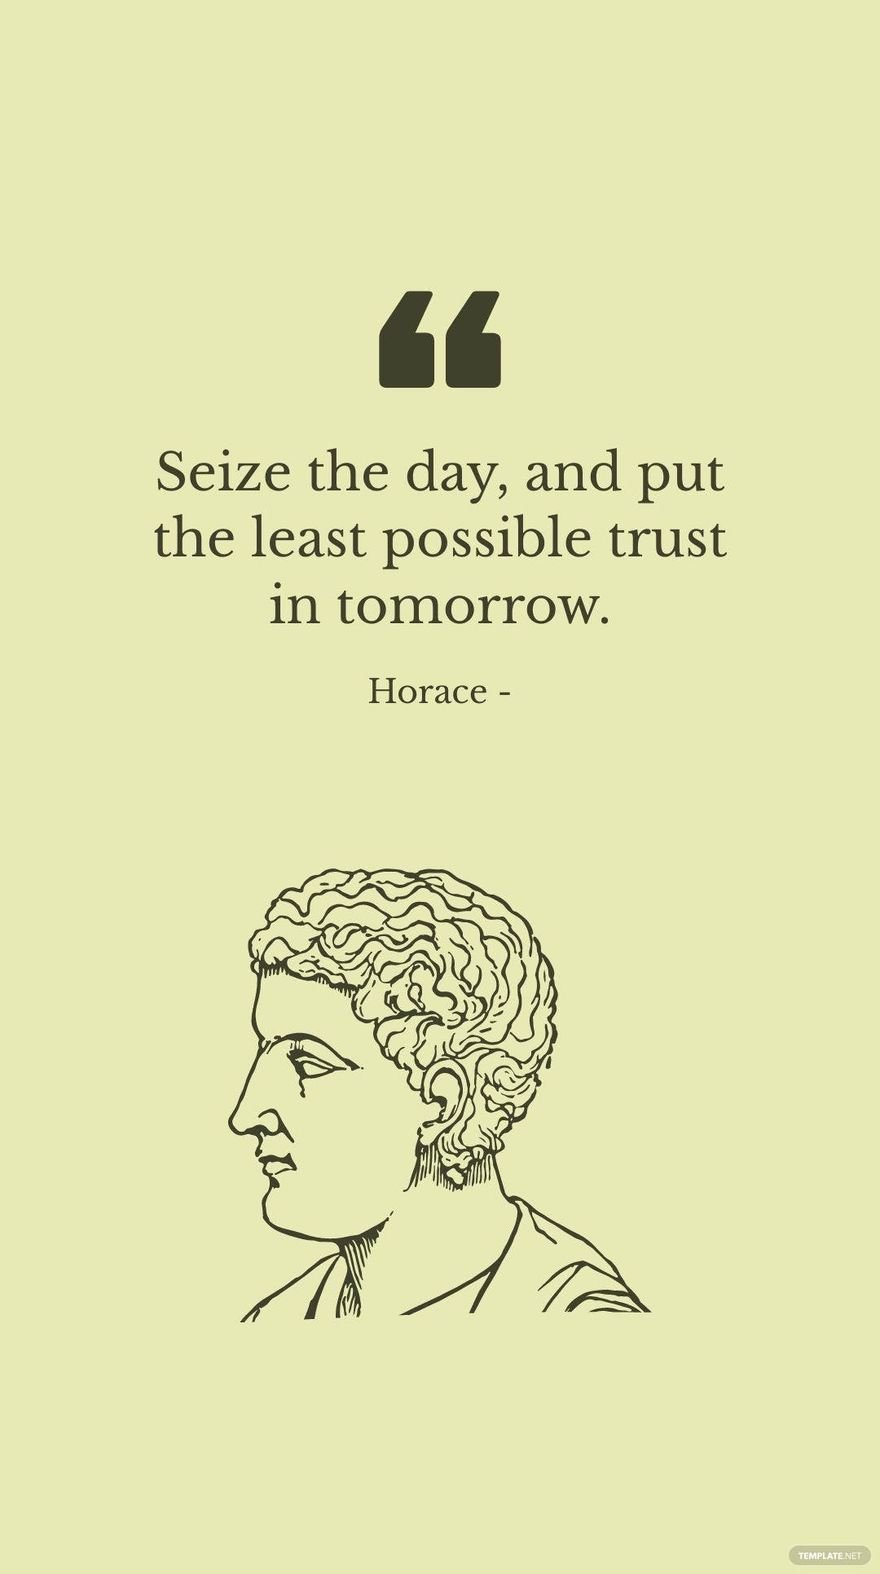 Horace - Seize the day, and put the least possible trust in tomorrow. in PSD